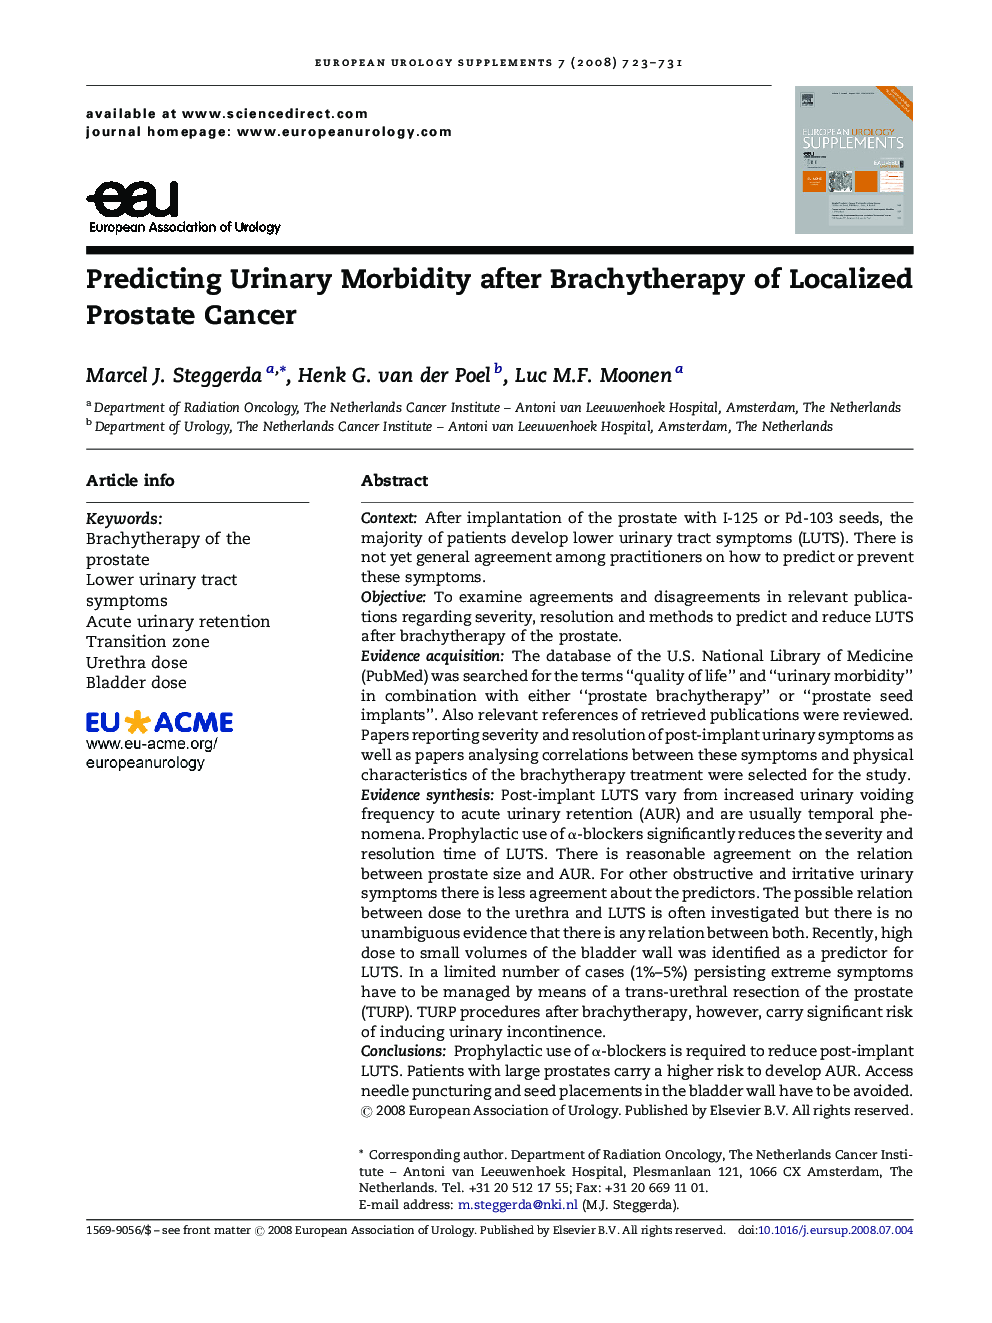 Predicting Urinary Morbidity after Brachytherapy of Localized Prostate Cancer